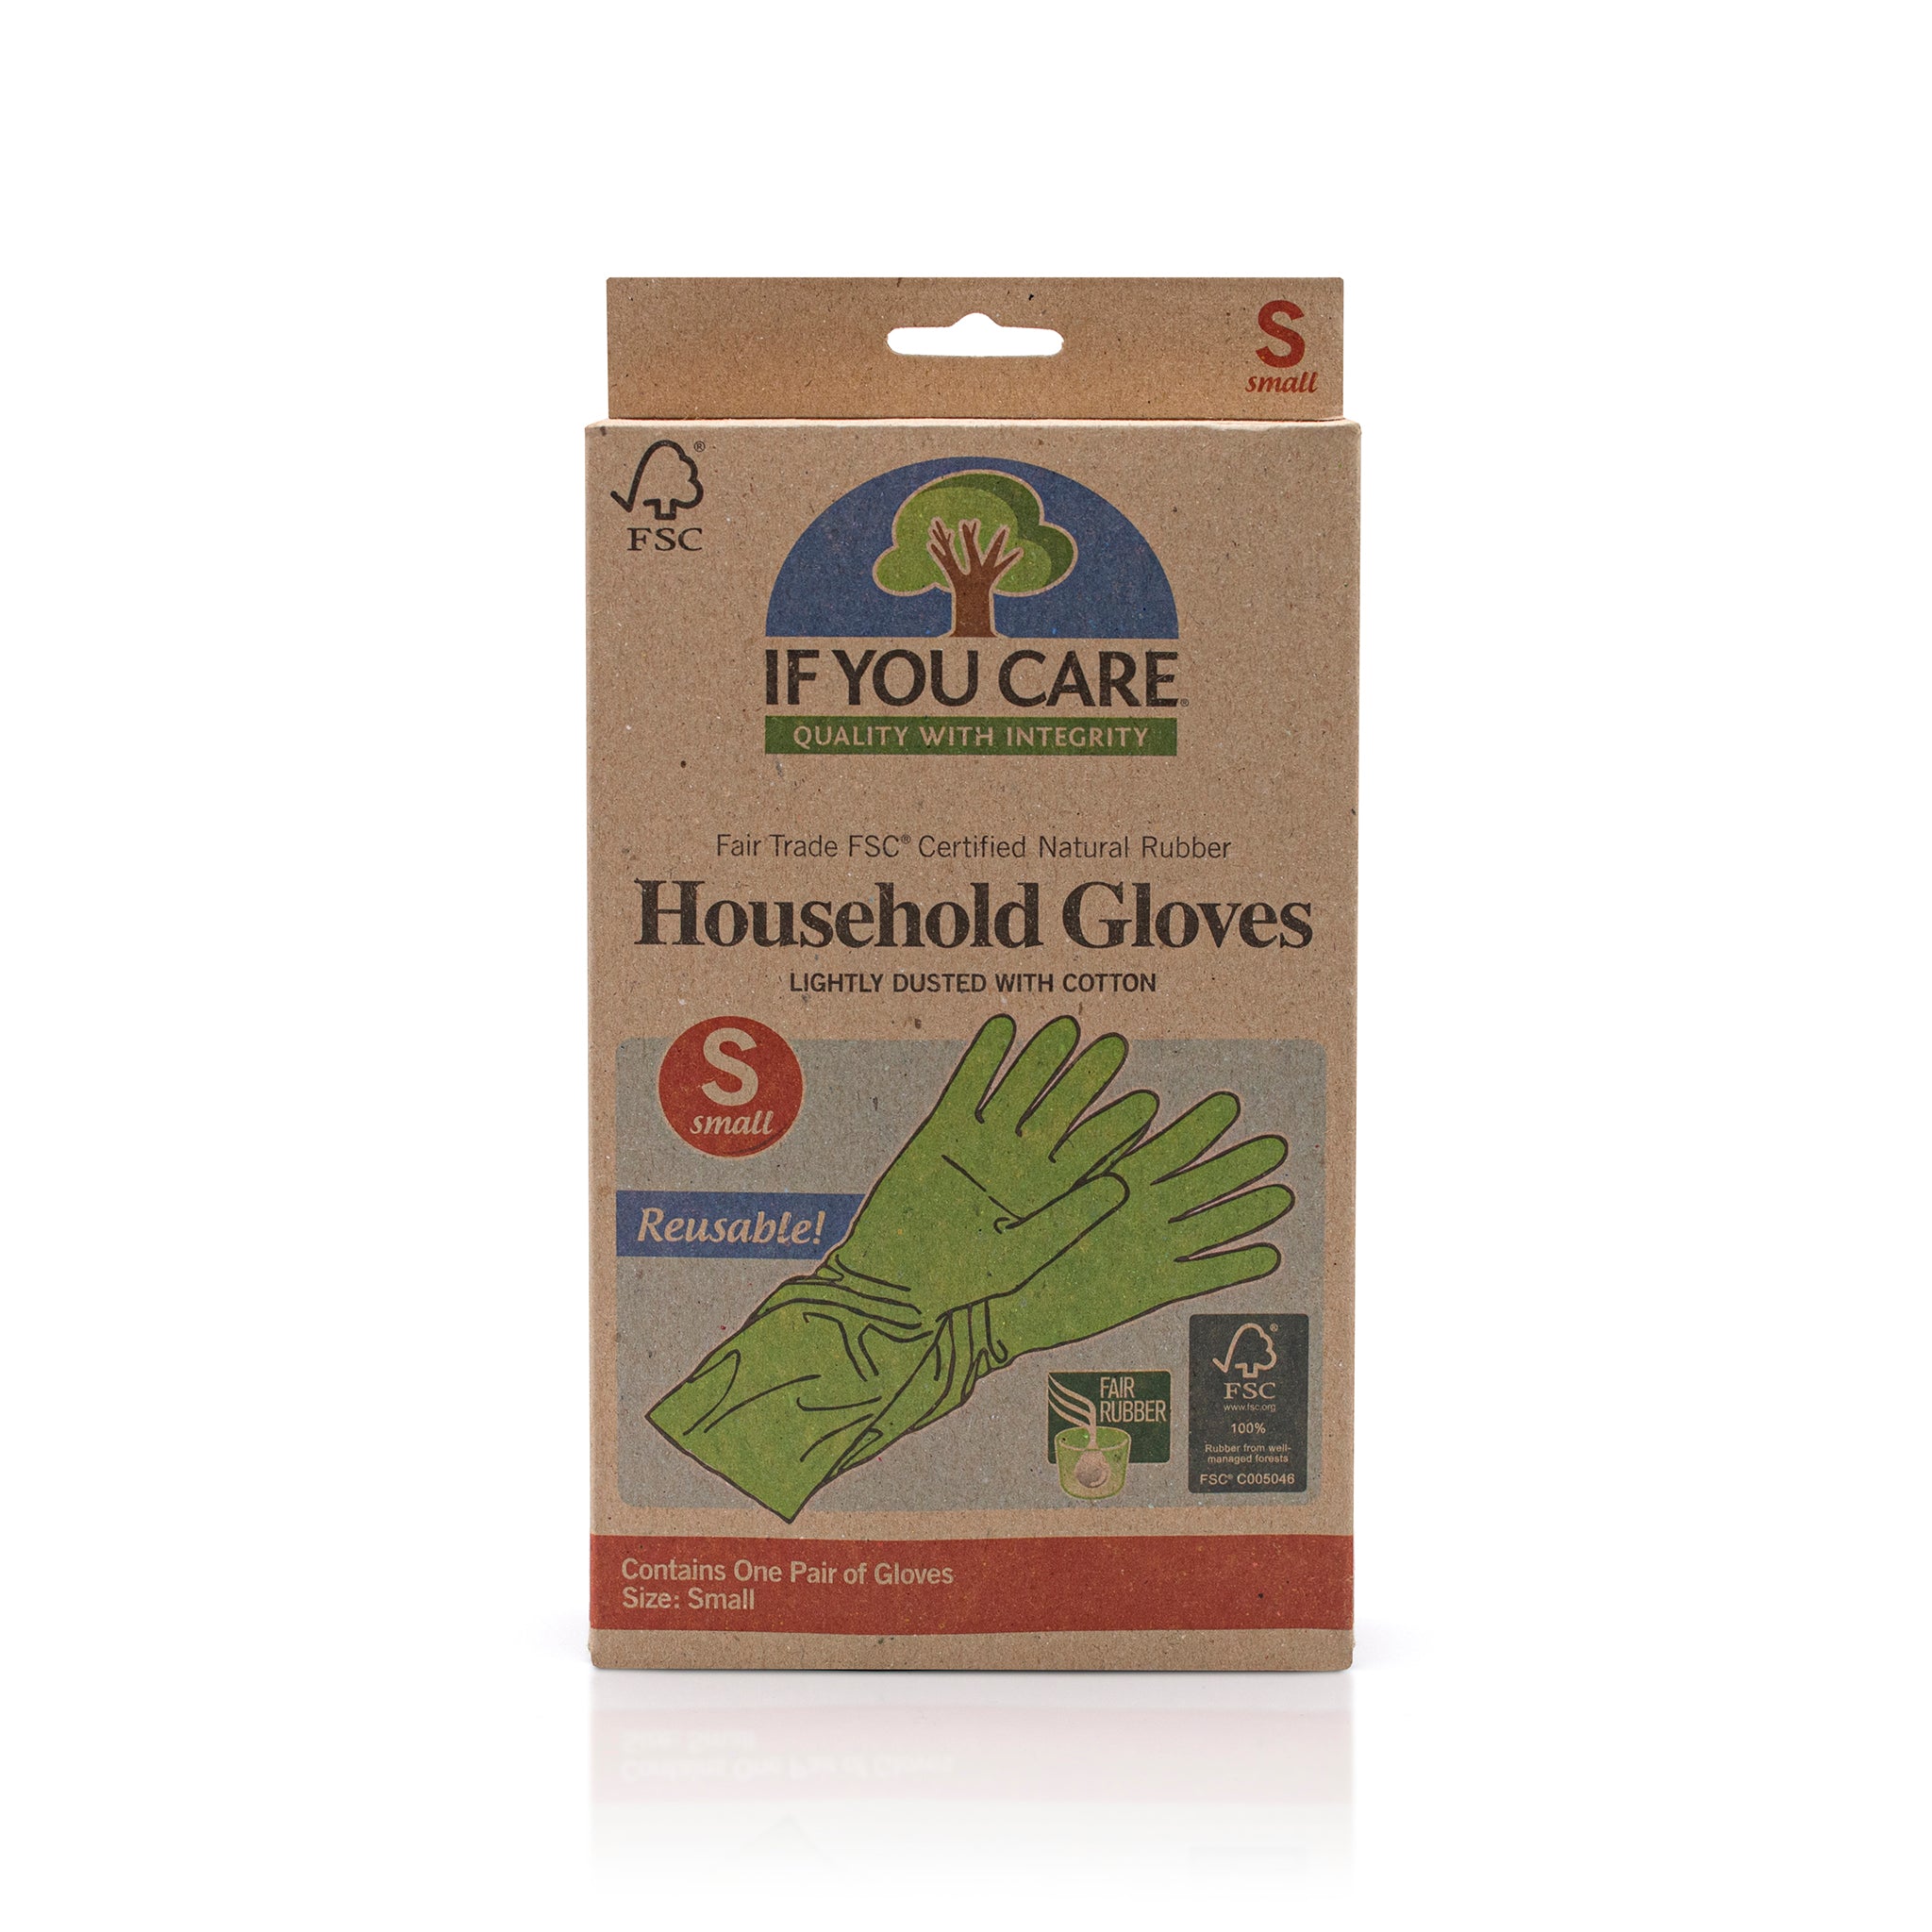 if you care household gloves in small